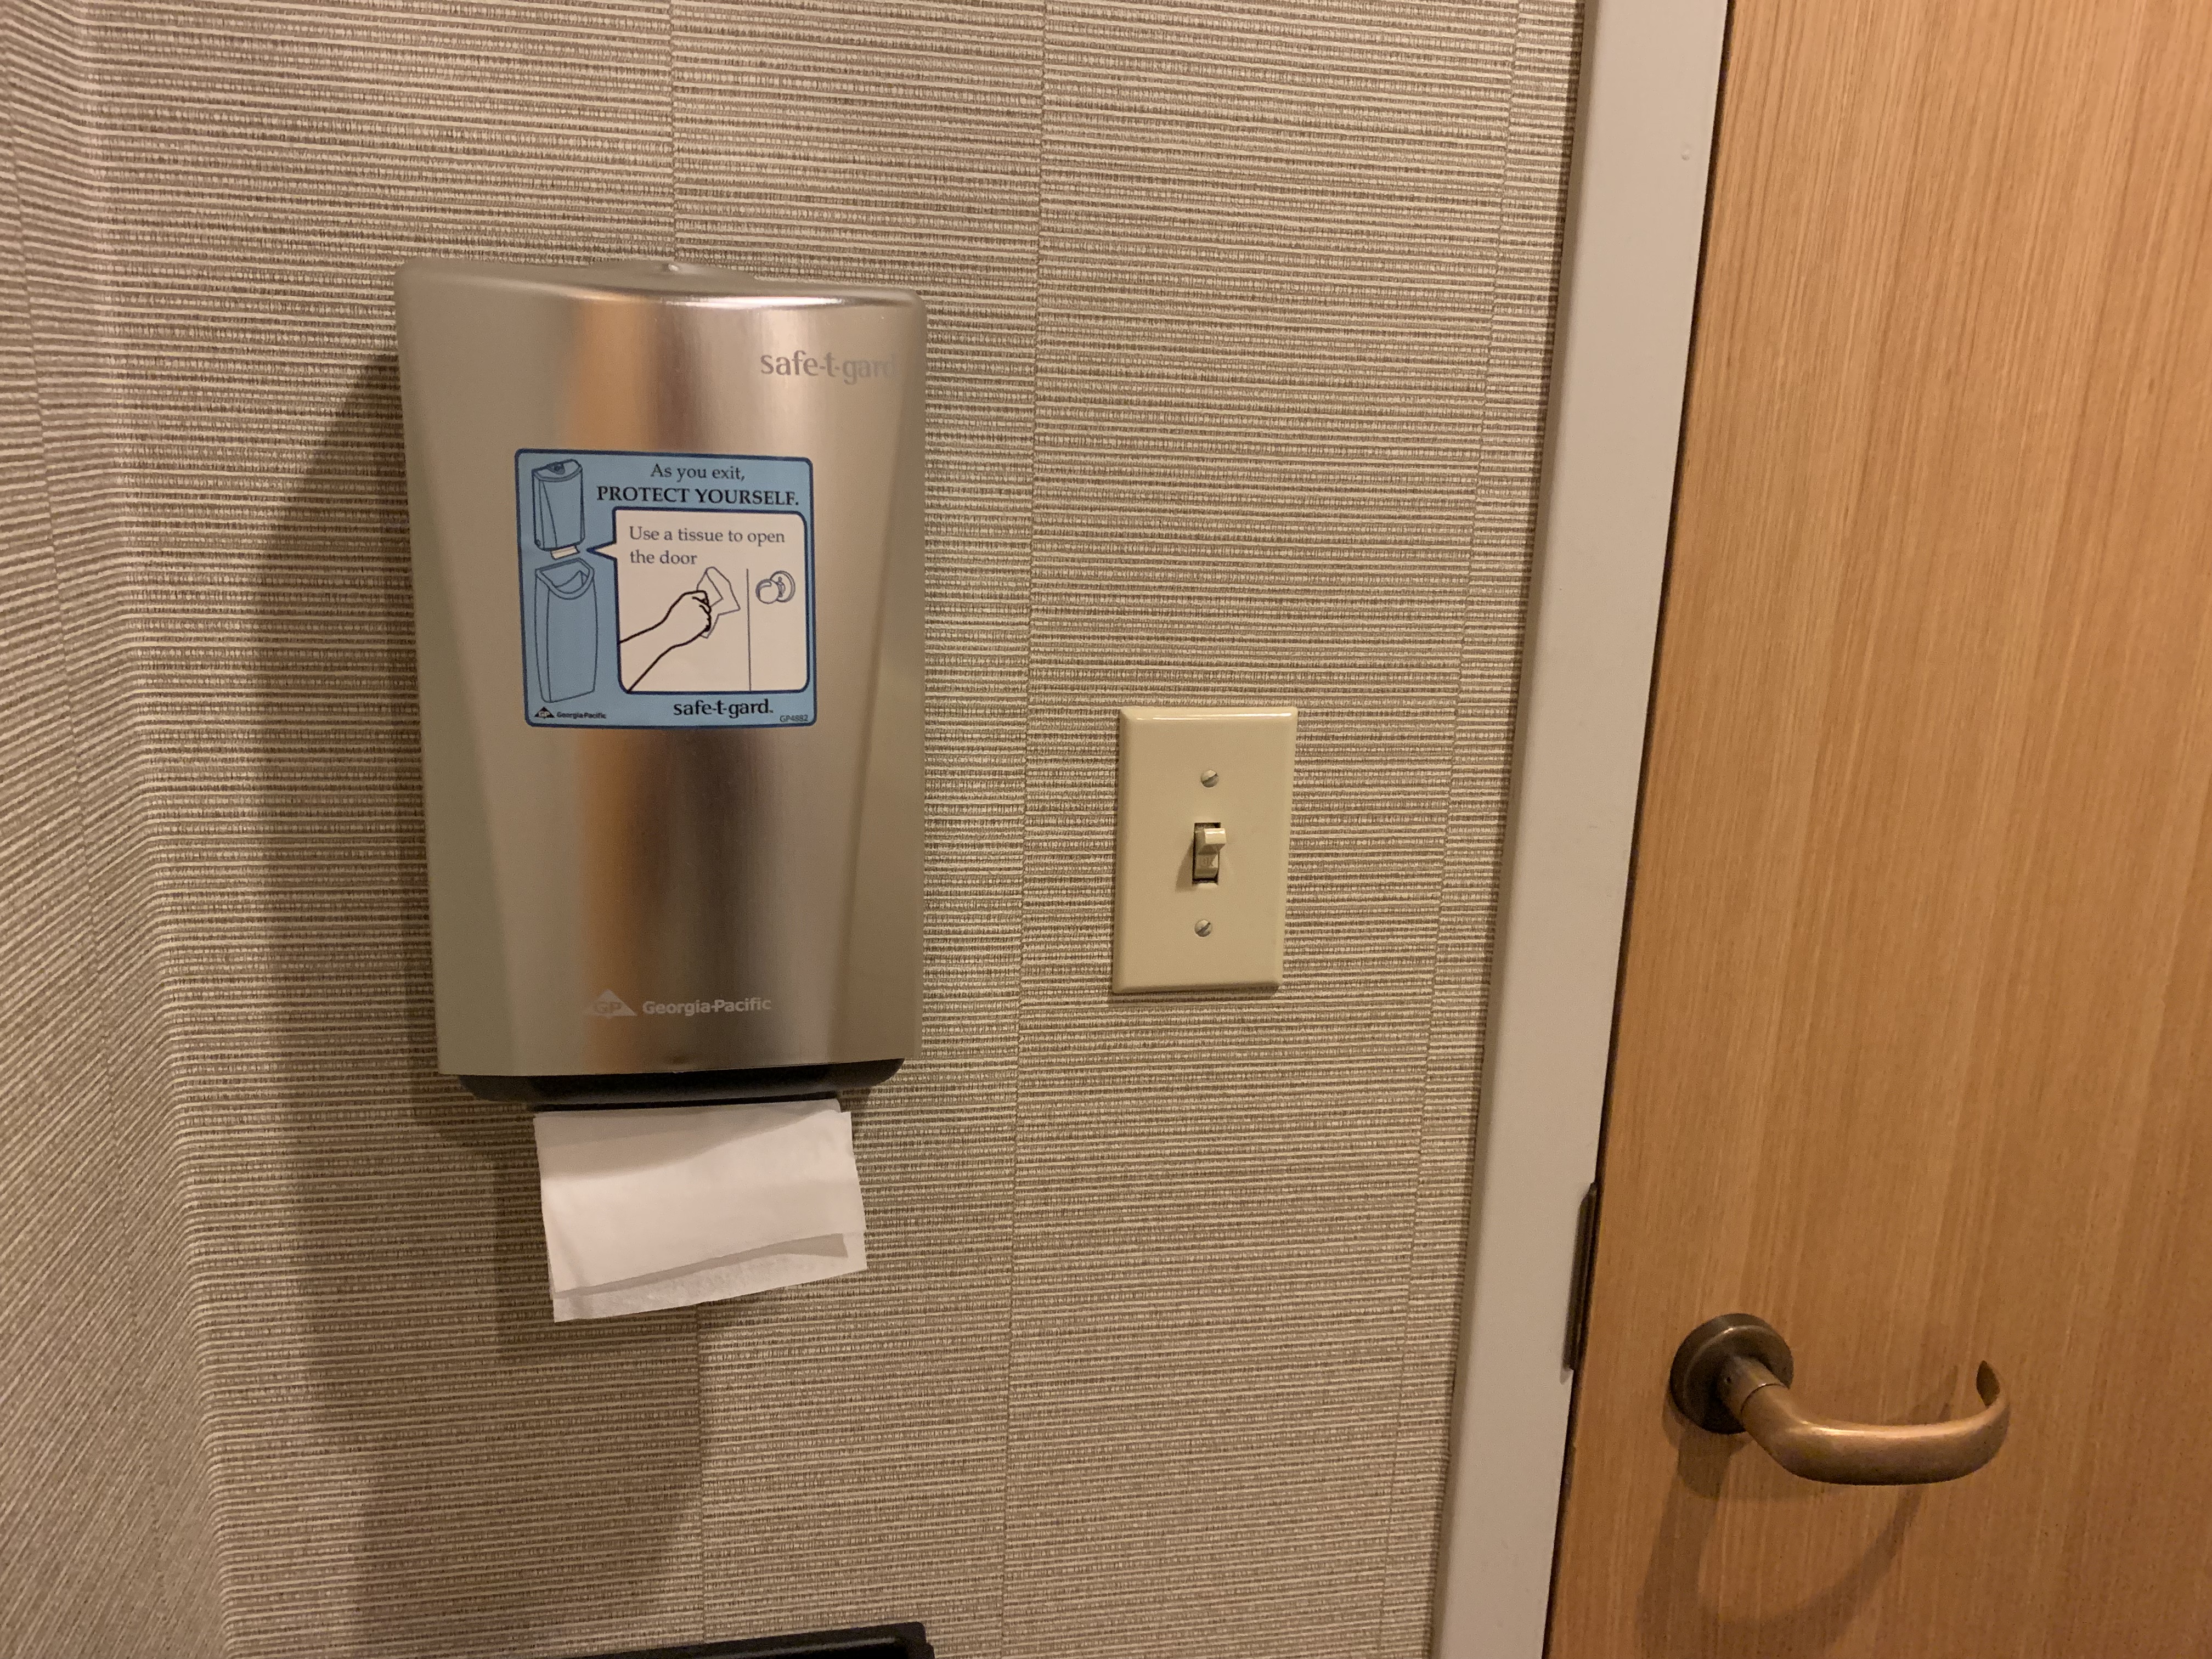 On the right side of the picture, a door with door handle opening inwards. On the left side, a light switch, and to its left a small paper-towel dispenser of sorts dispensing single tissues from the bottom, with the outline of a trash can in the picture below. A sign on the dispenser reads: “As you exit, PROTECT YOURSELF. Use a tissue to open the door.” The second sentence is shown inside a speech bubble emanating from a picture of the dispenser. Fortunately, the picture of the dispenser on the dispenser does not contain a picture of the dispenser to prevent infinite regress.